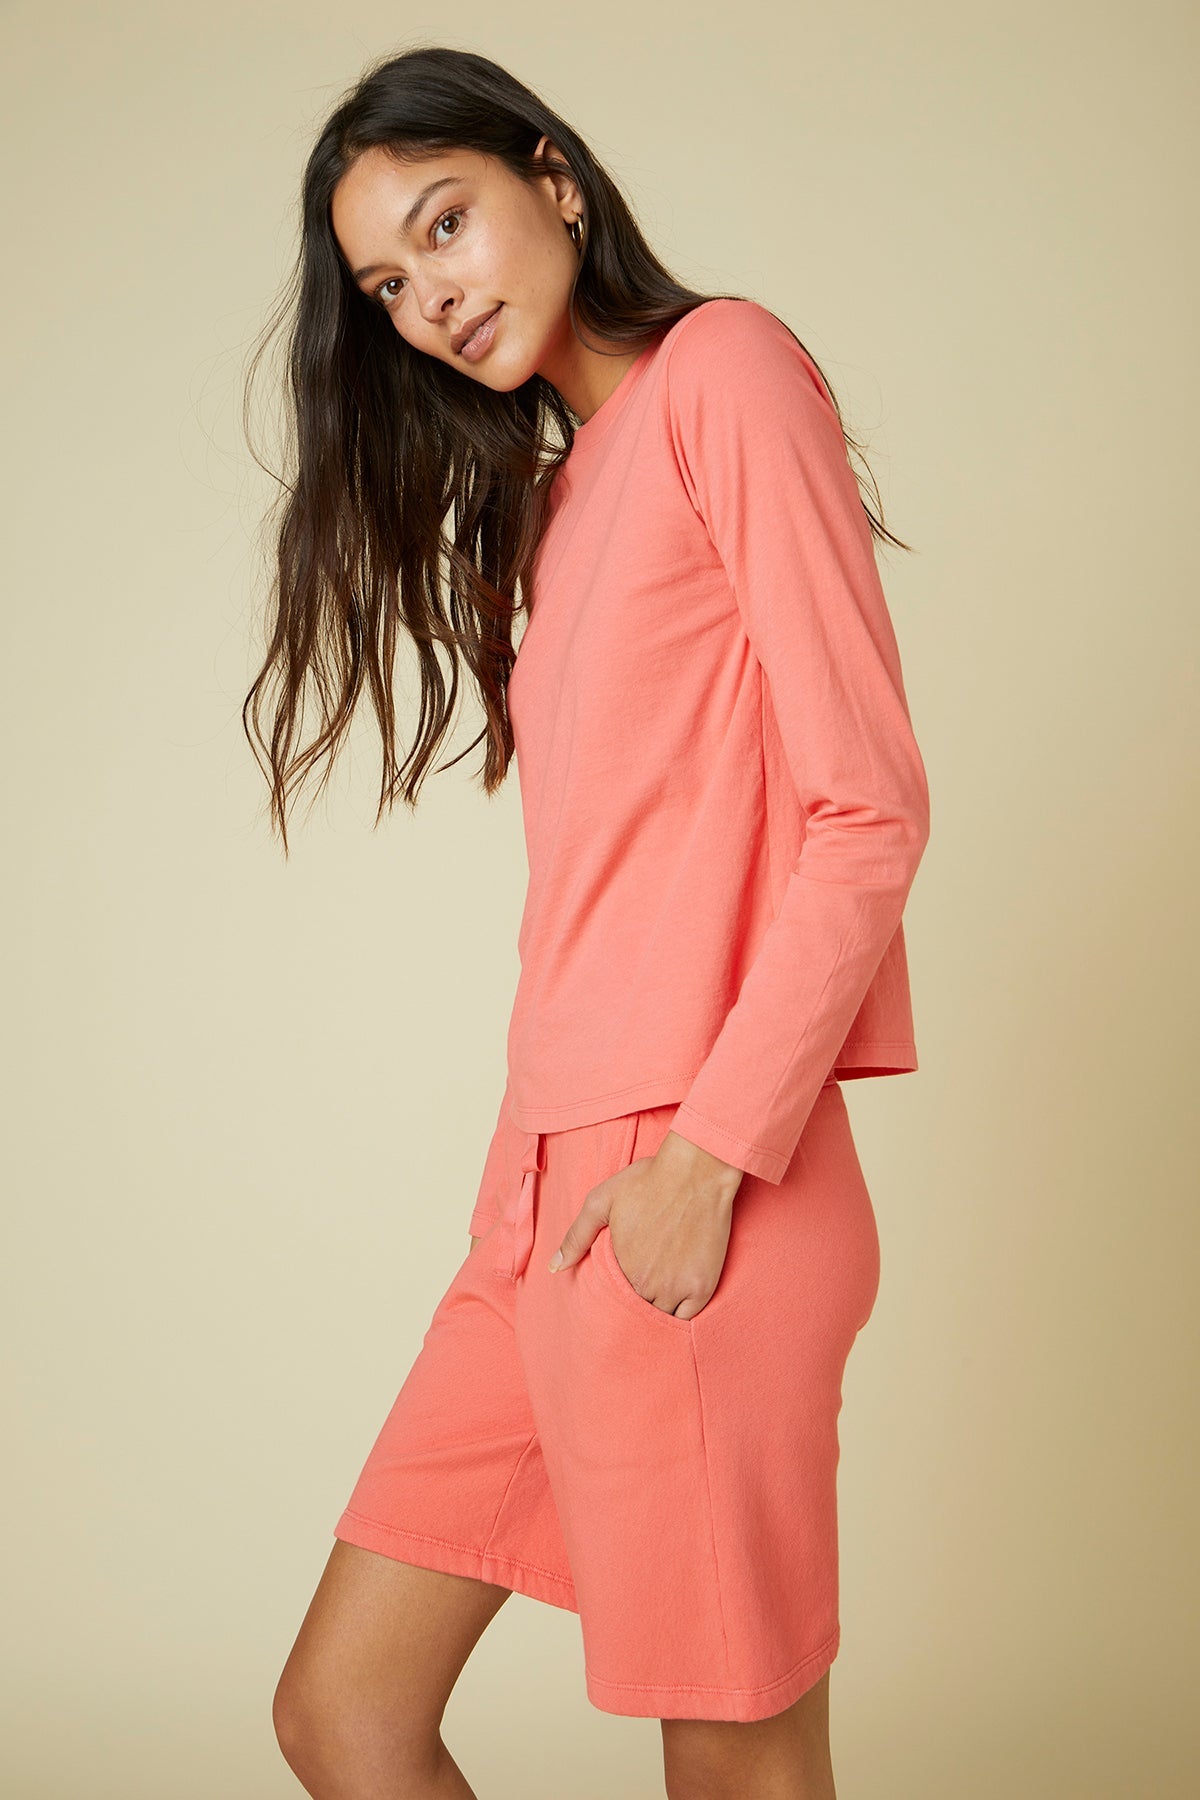   The model is wearing a pink long-sleeved Velvet by Jenny Graham pyjama top and shorts. 